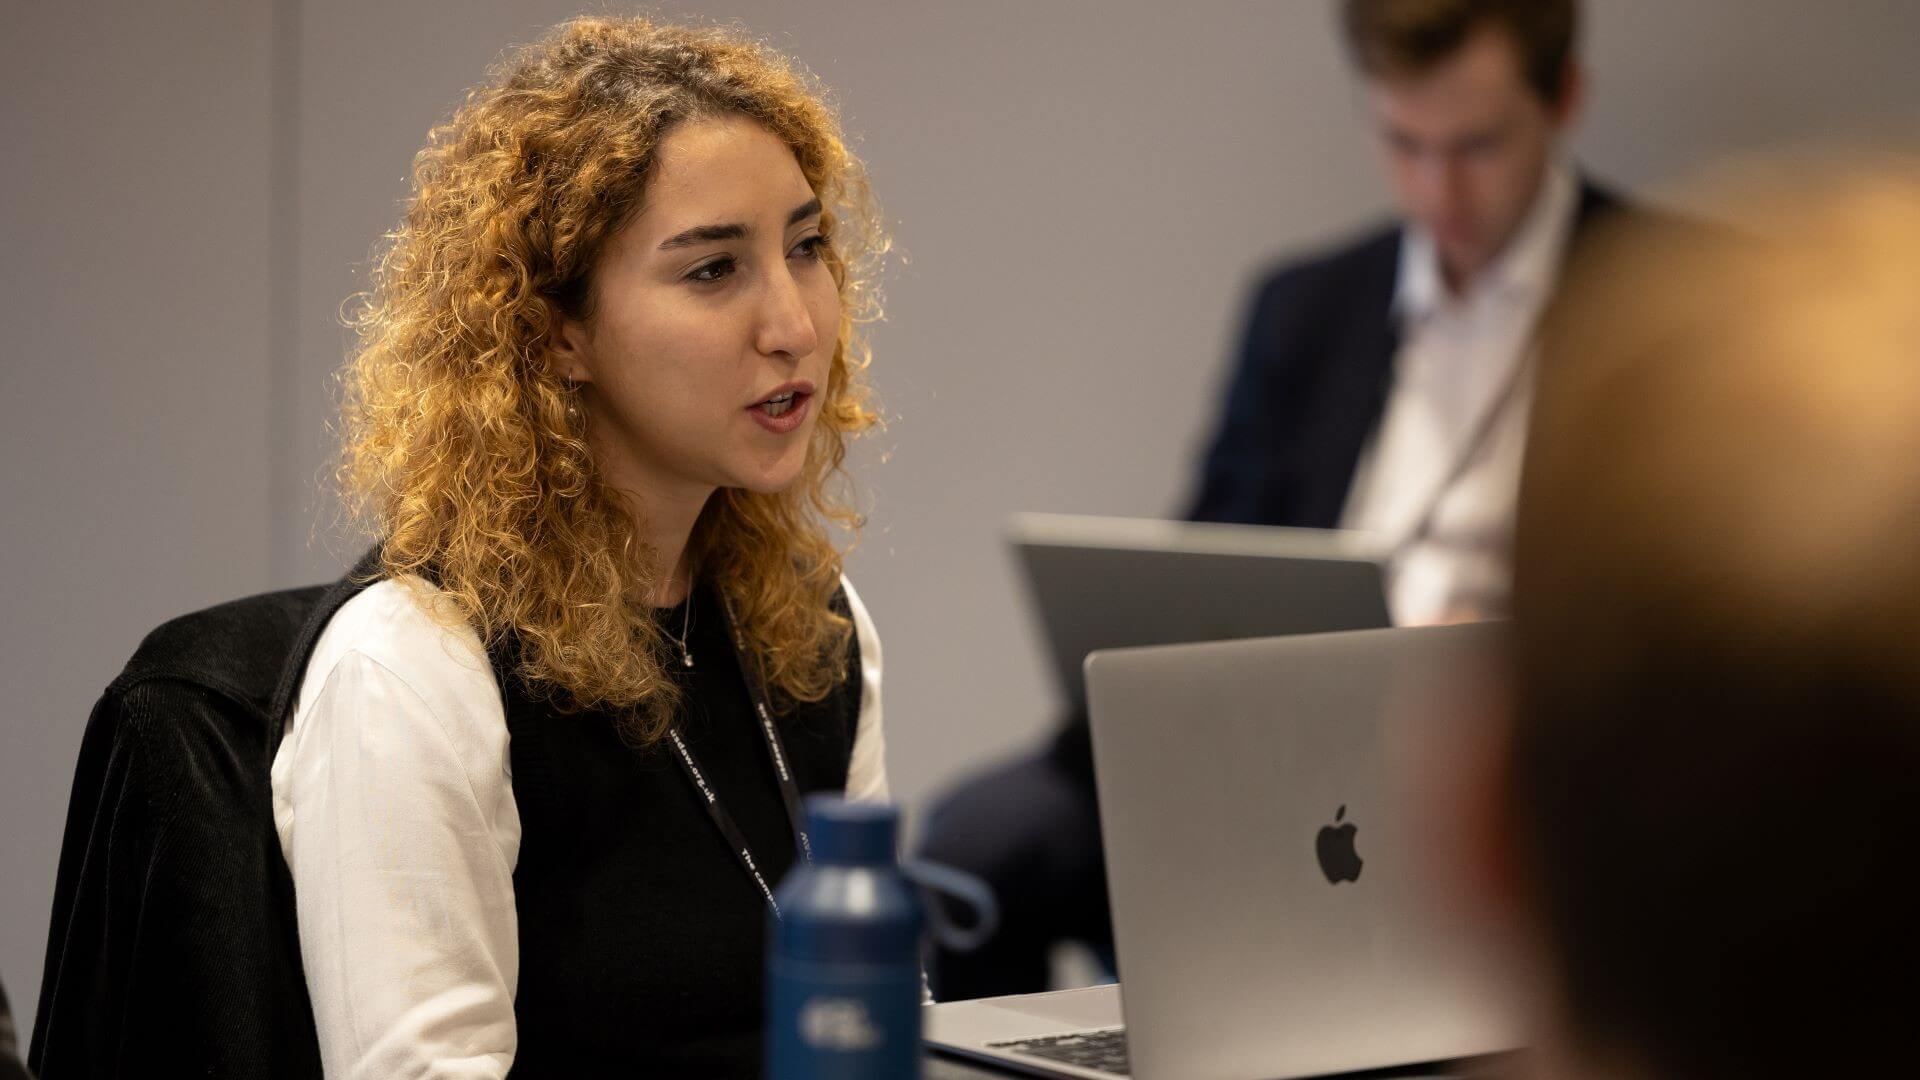 Photo of Esin Serin, Policy Fellow, Grantham Research Institute on Climate Change and the Environment, LSE, sat at table with laptop in front of her